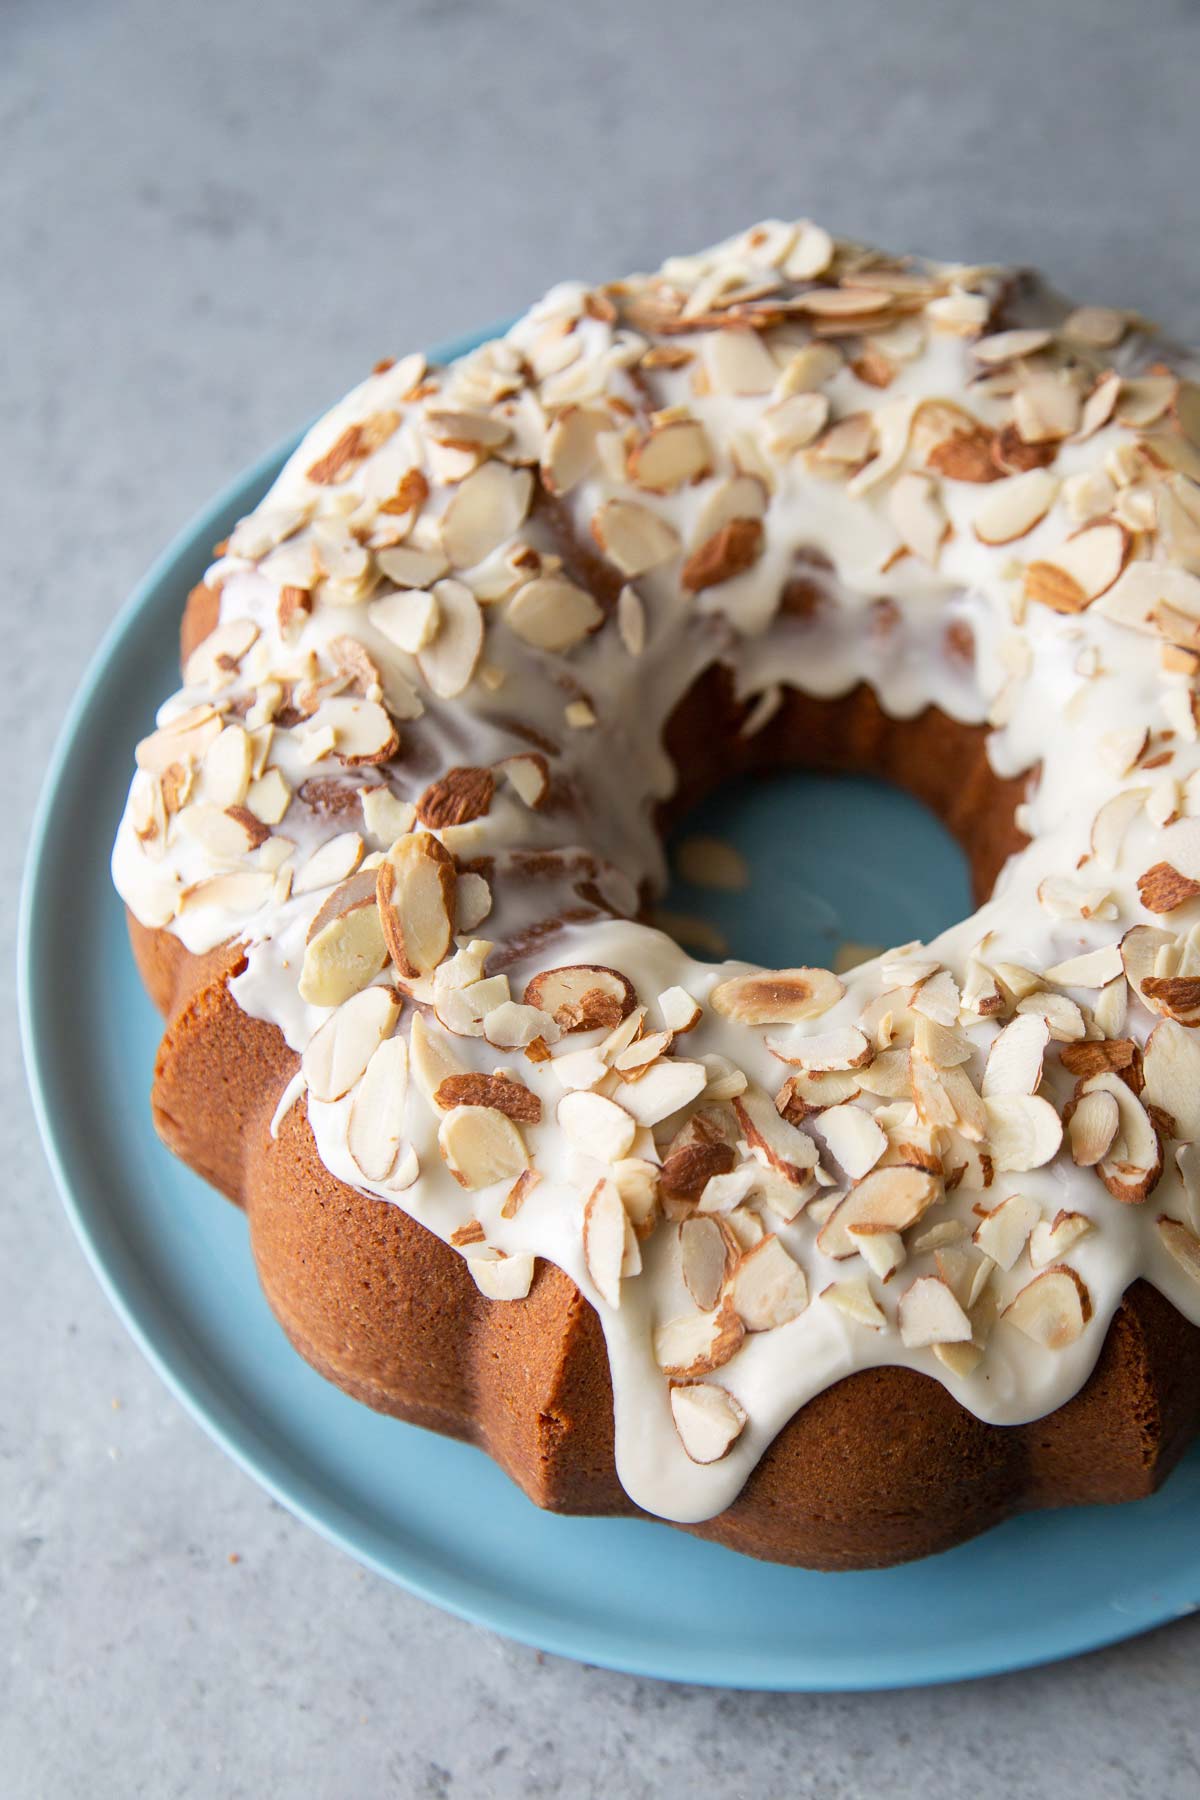 almond pound cake with almond glaze and toasted sliced almonds on blue plate.